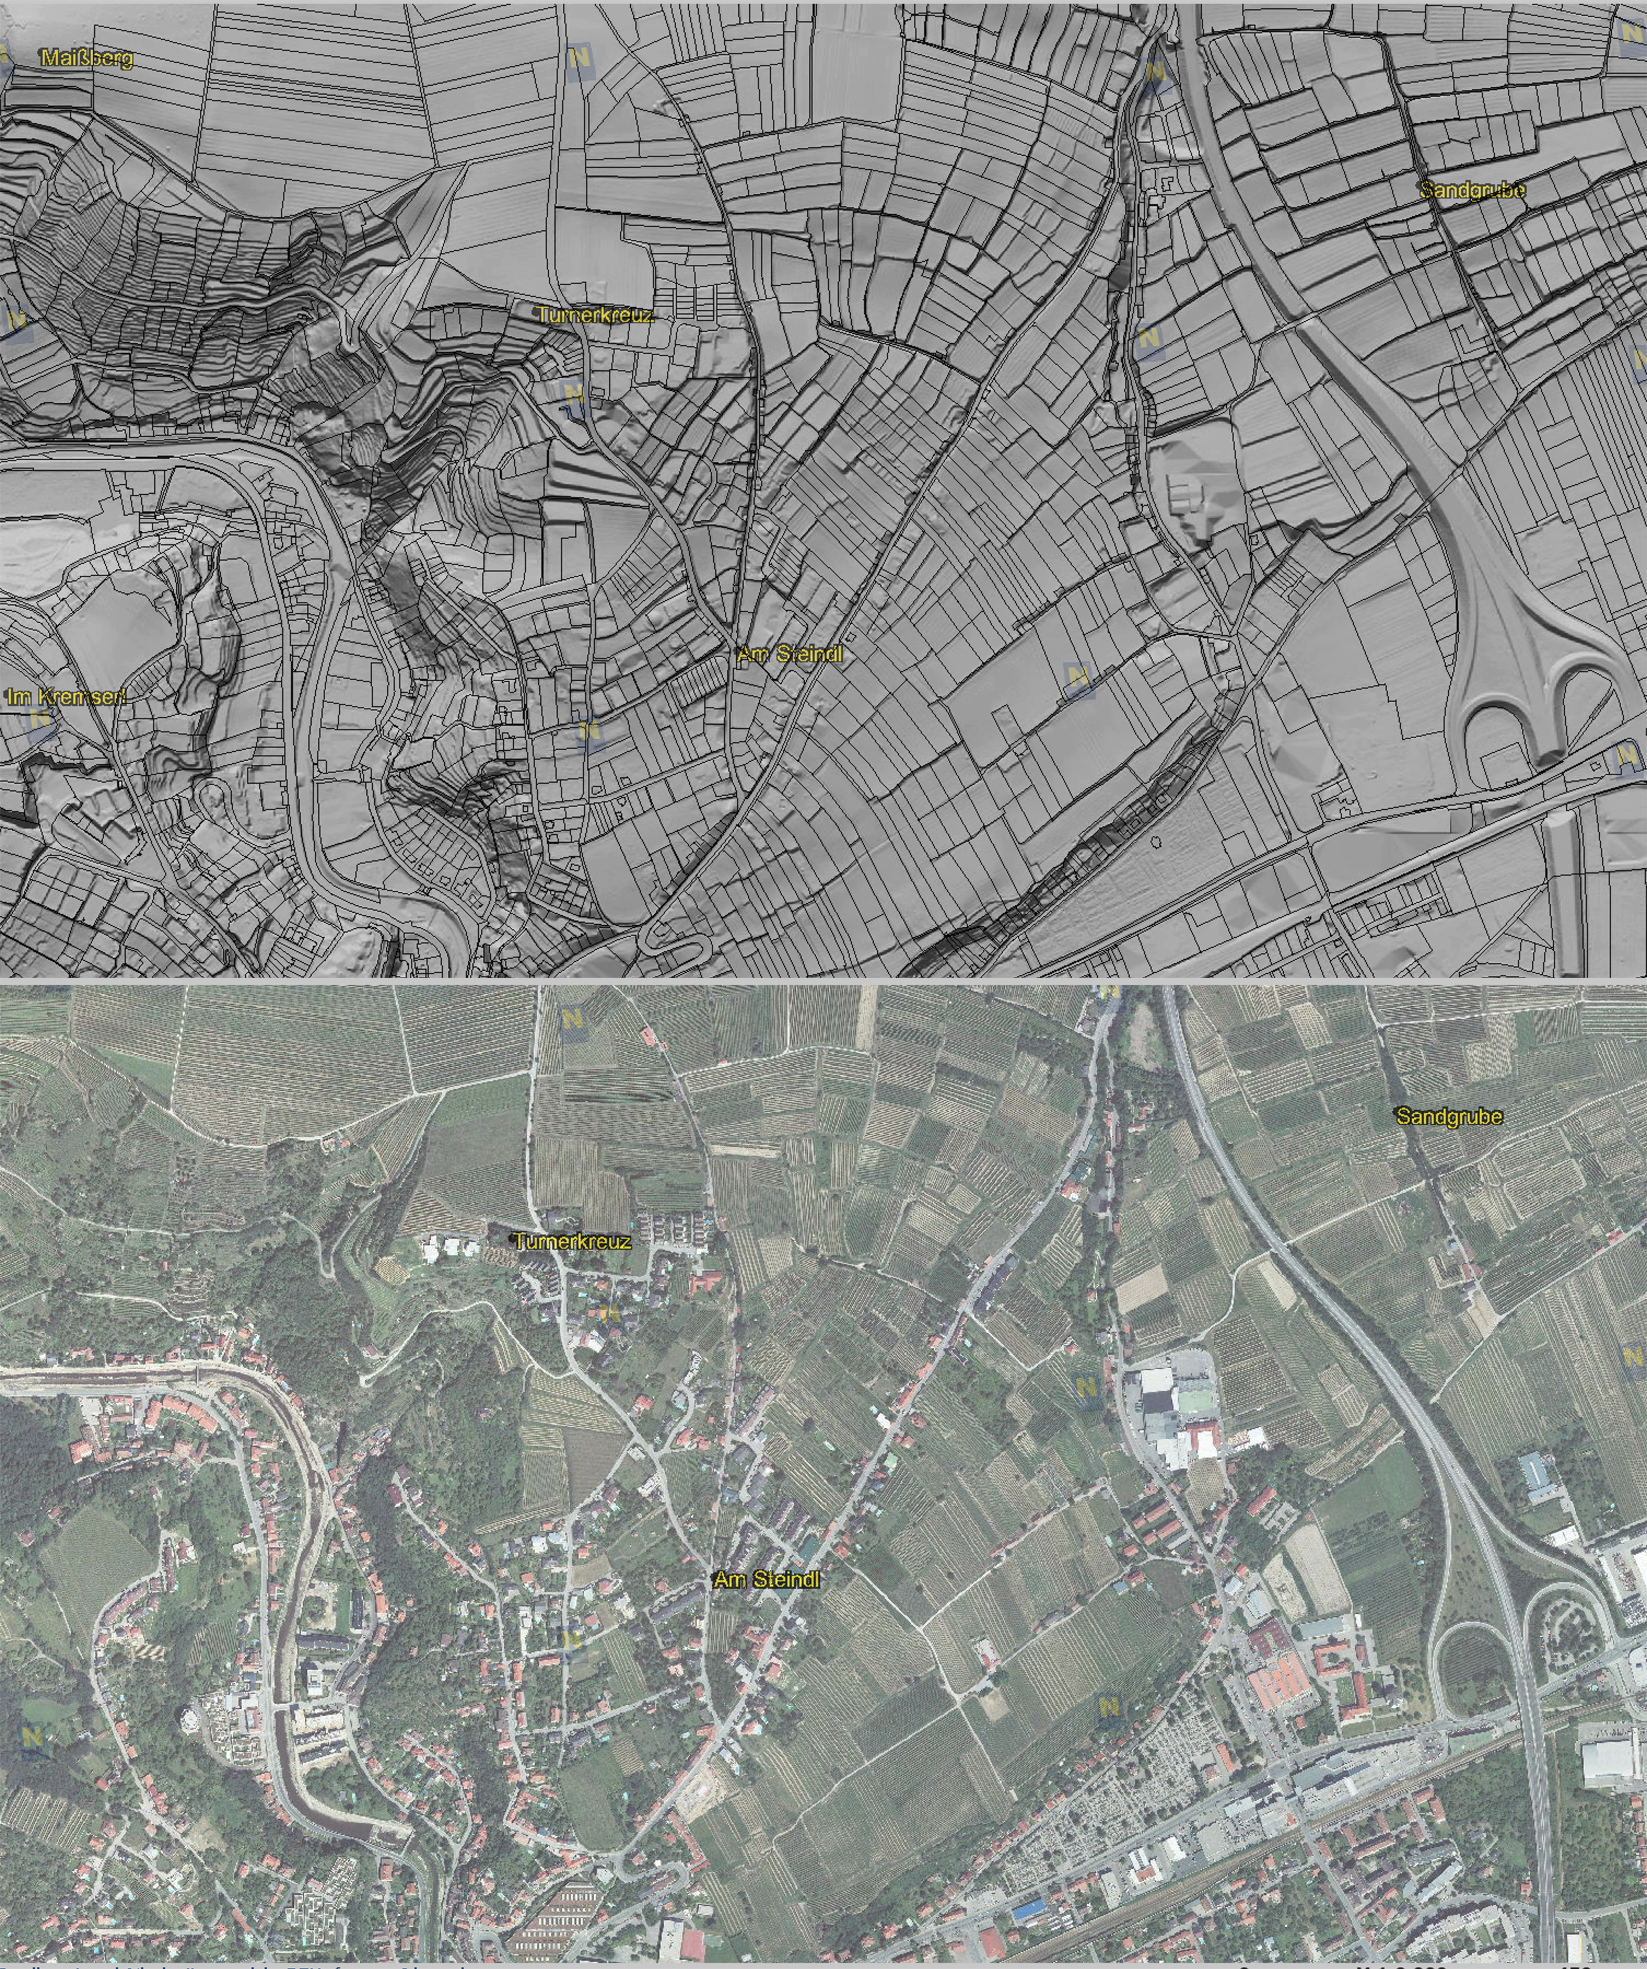 The maps show the area around the city of Krems and the eastern part of the Wachau, UNESCO world heritage and famous for its wine terraces. - The lascer scan greatly reveals a landscape of wine terraces, the river Danube, but also artificial objects as roads and dams. 